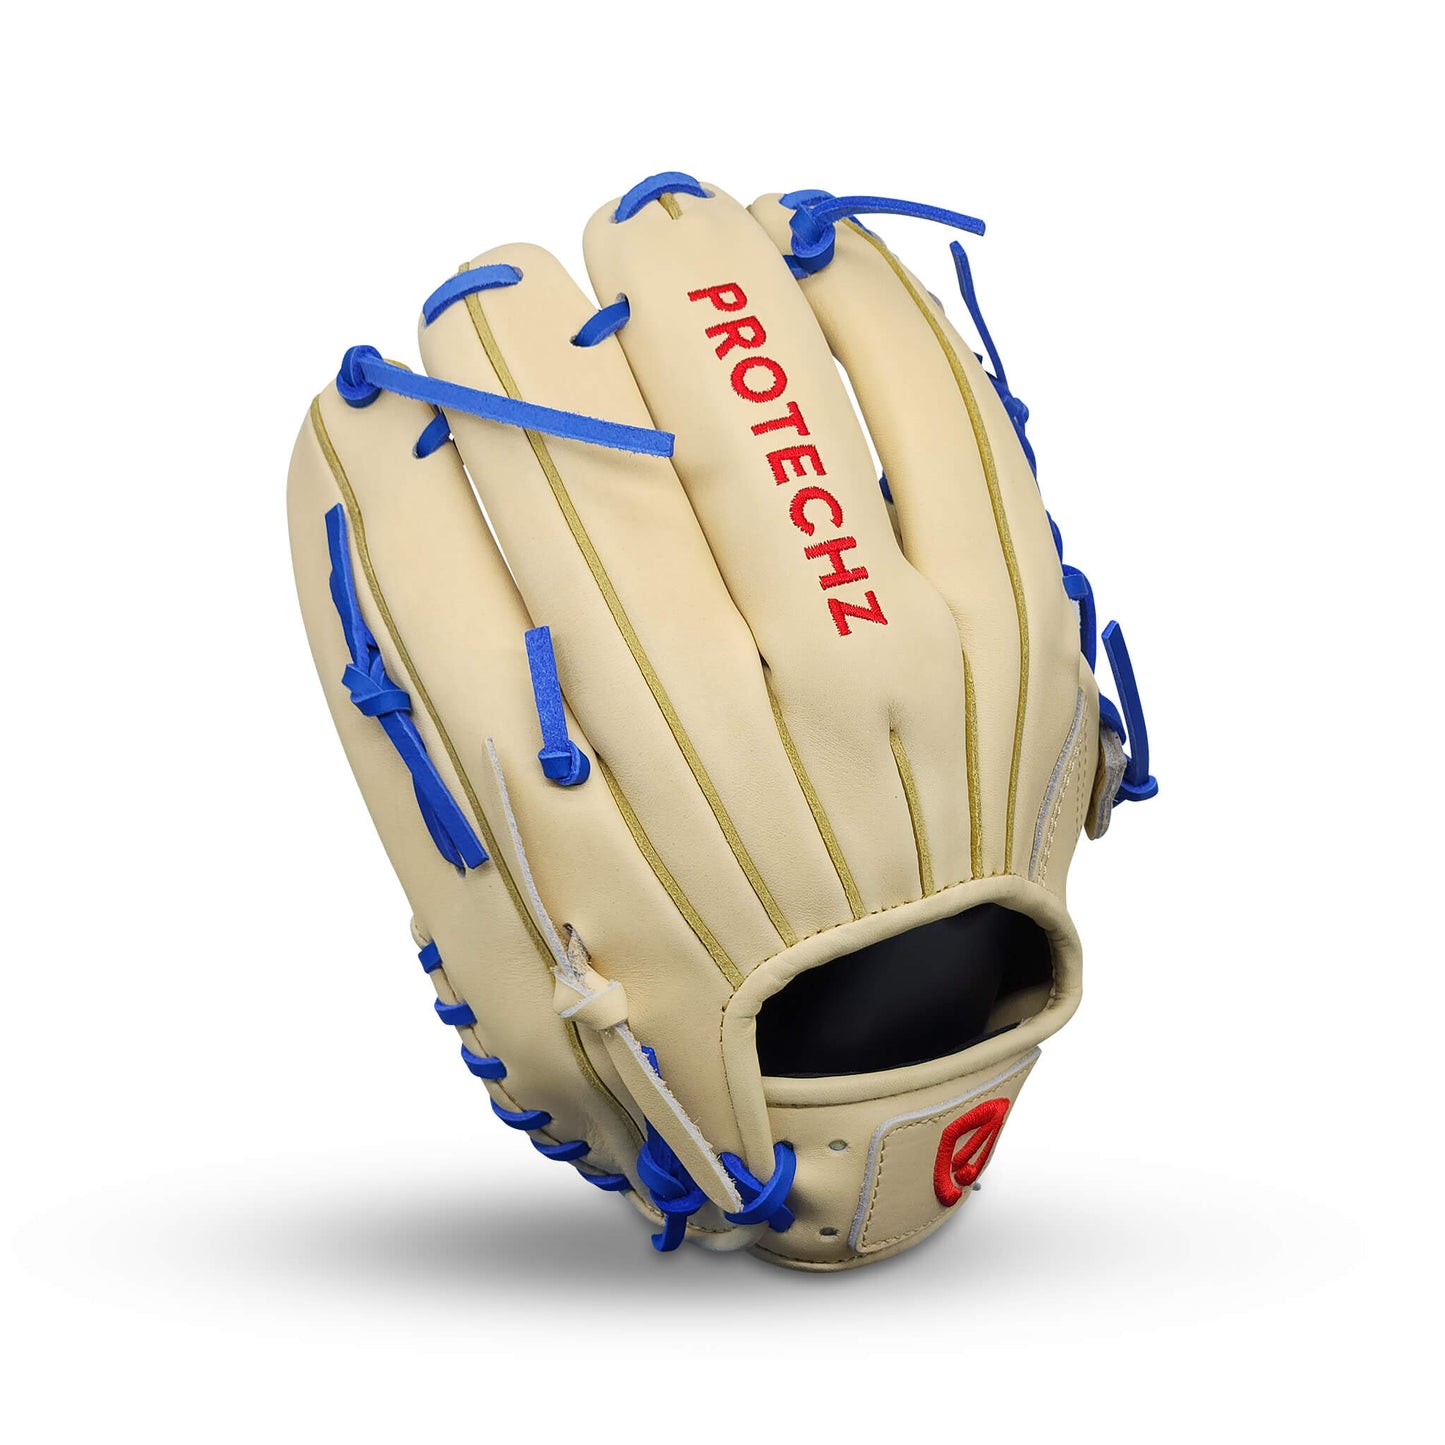 Titan Series Limited Edition 11.75” Infield Glove with T-Web, Camel Shell and Palm, Royal Blue Lacing, and Embroidered Texas Flag – RHT